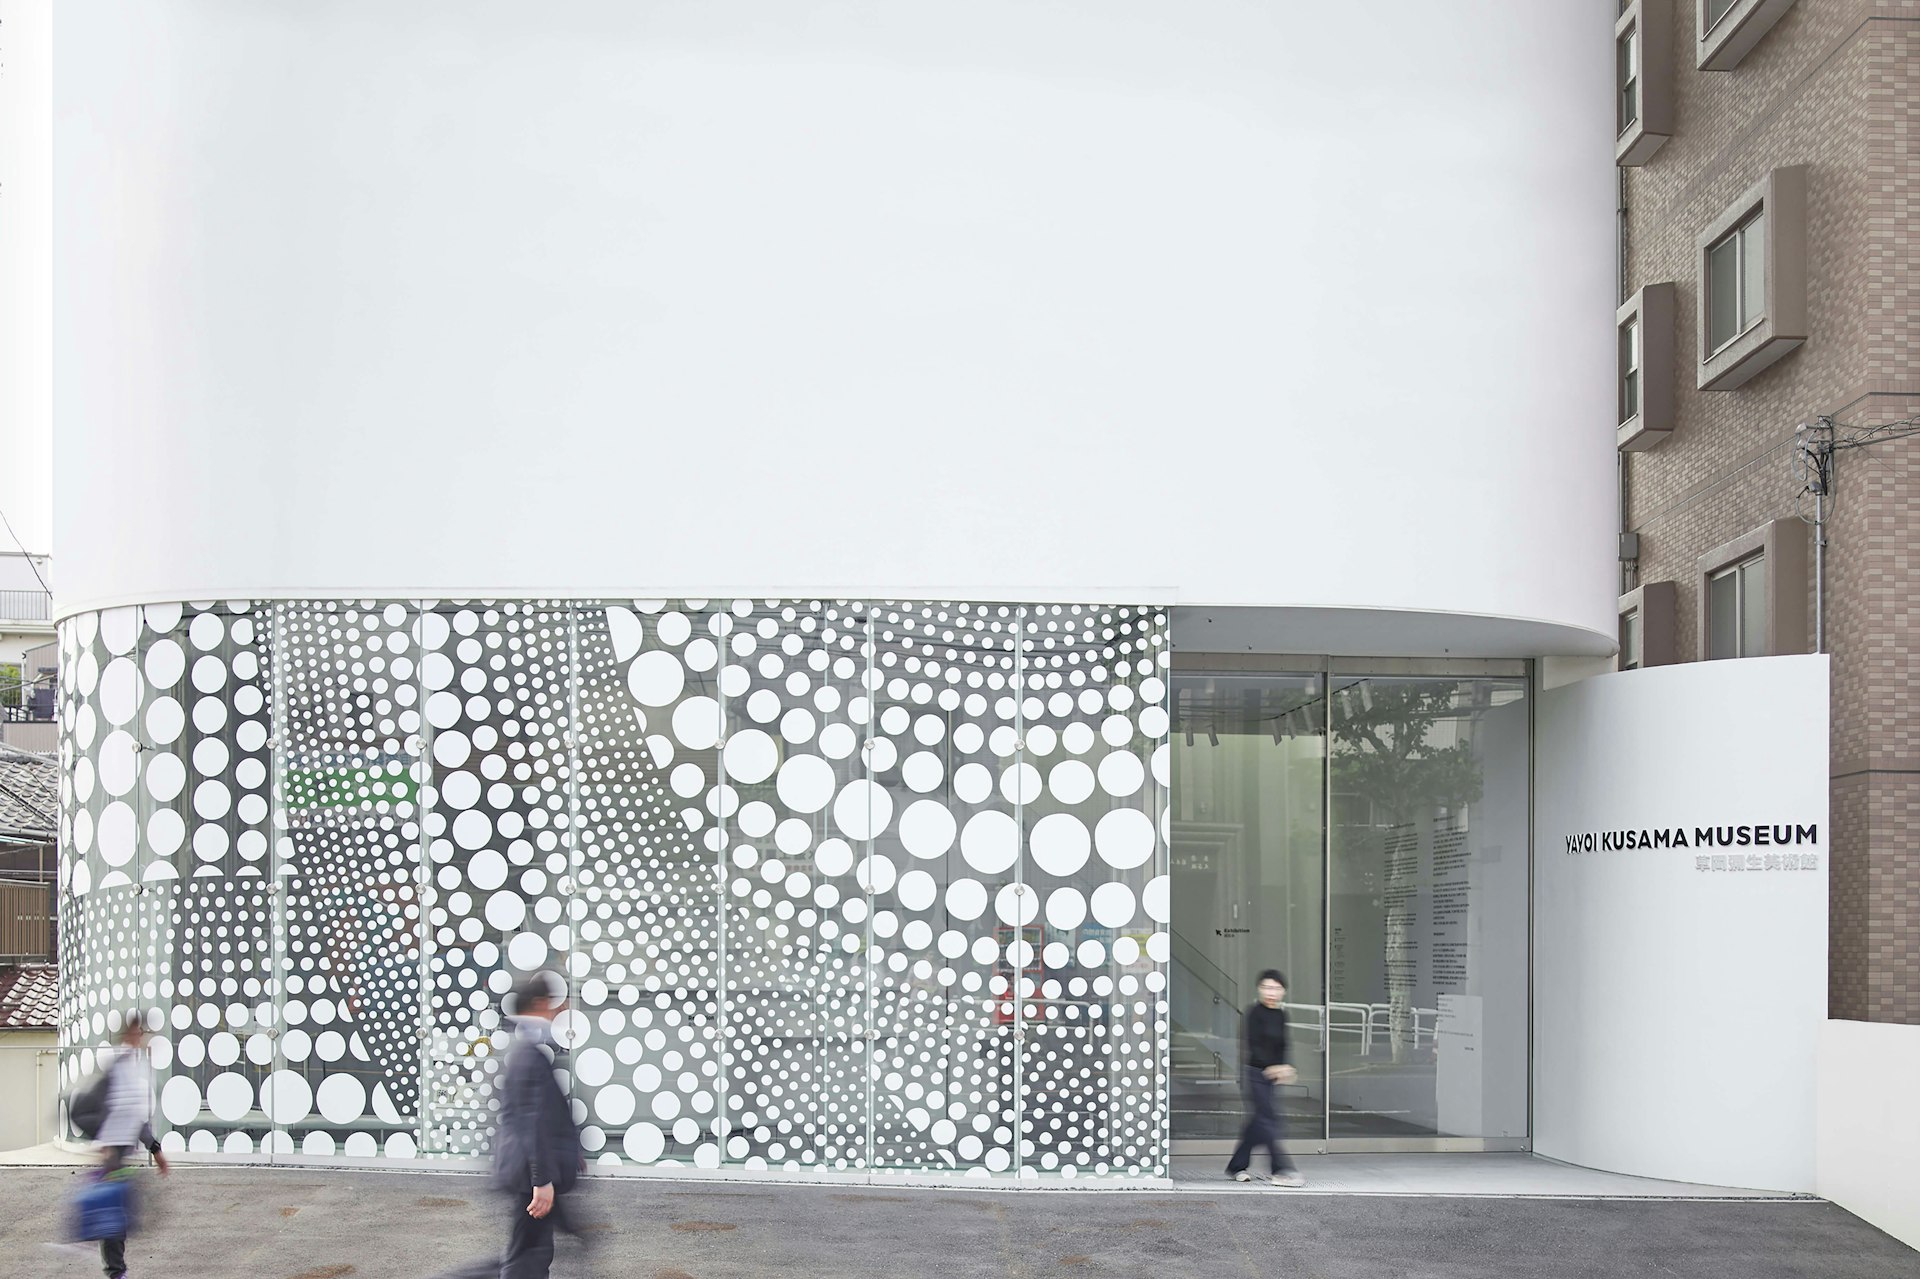 People walking past the Yayoi Kusama Museum in Tokyo, a curved white facade with a polka-dot motif behind glass windows on the ground floor 